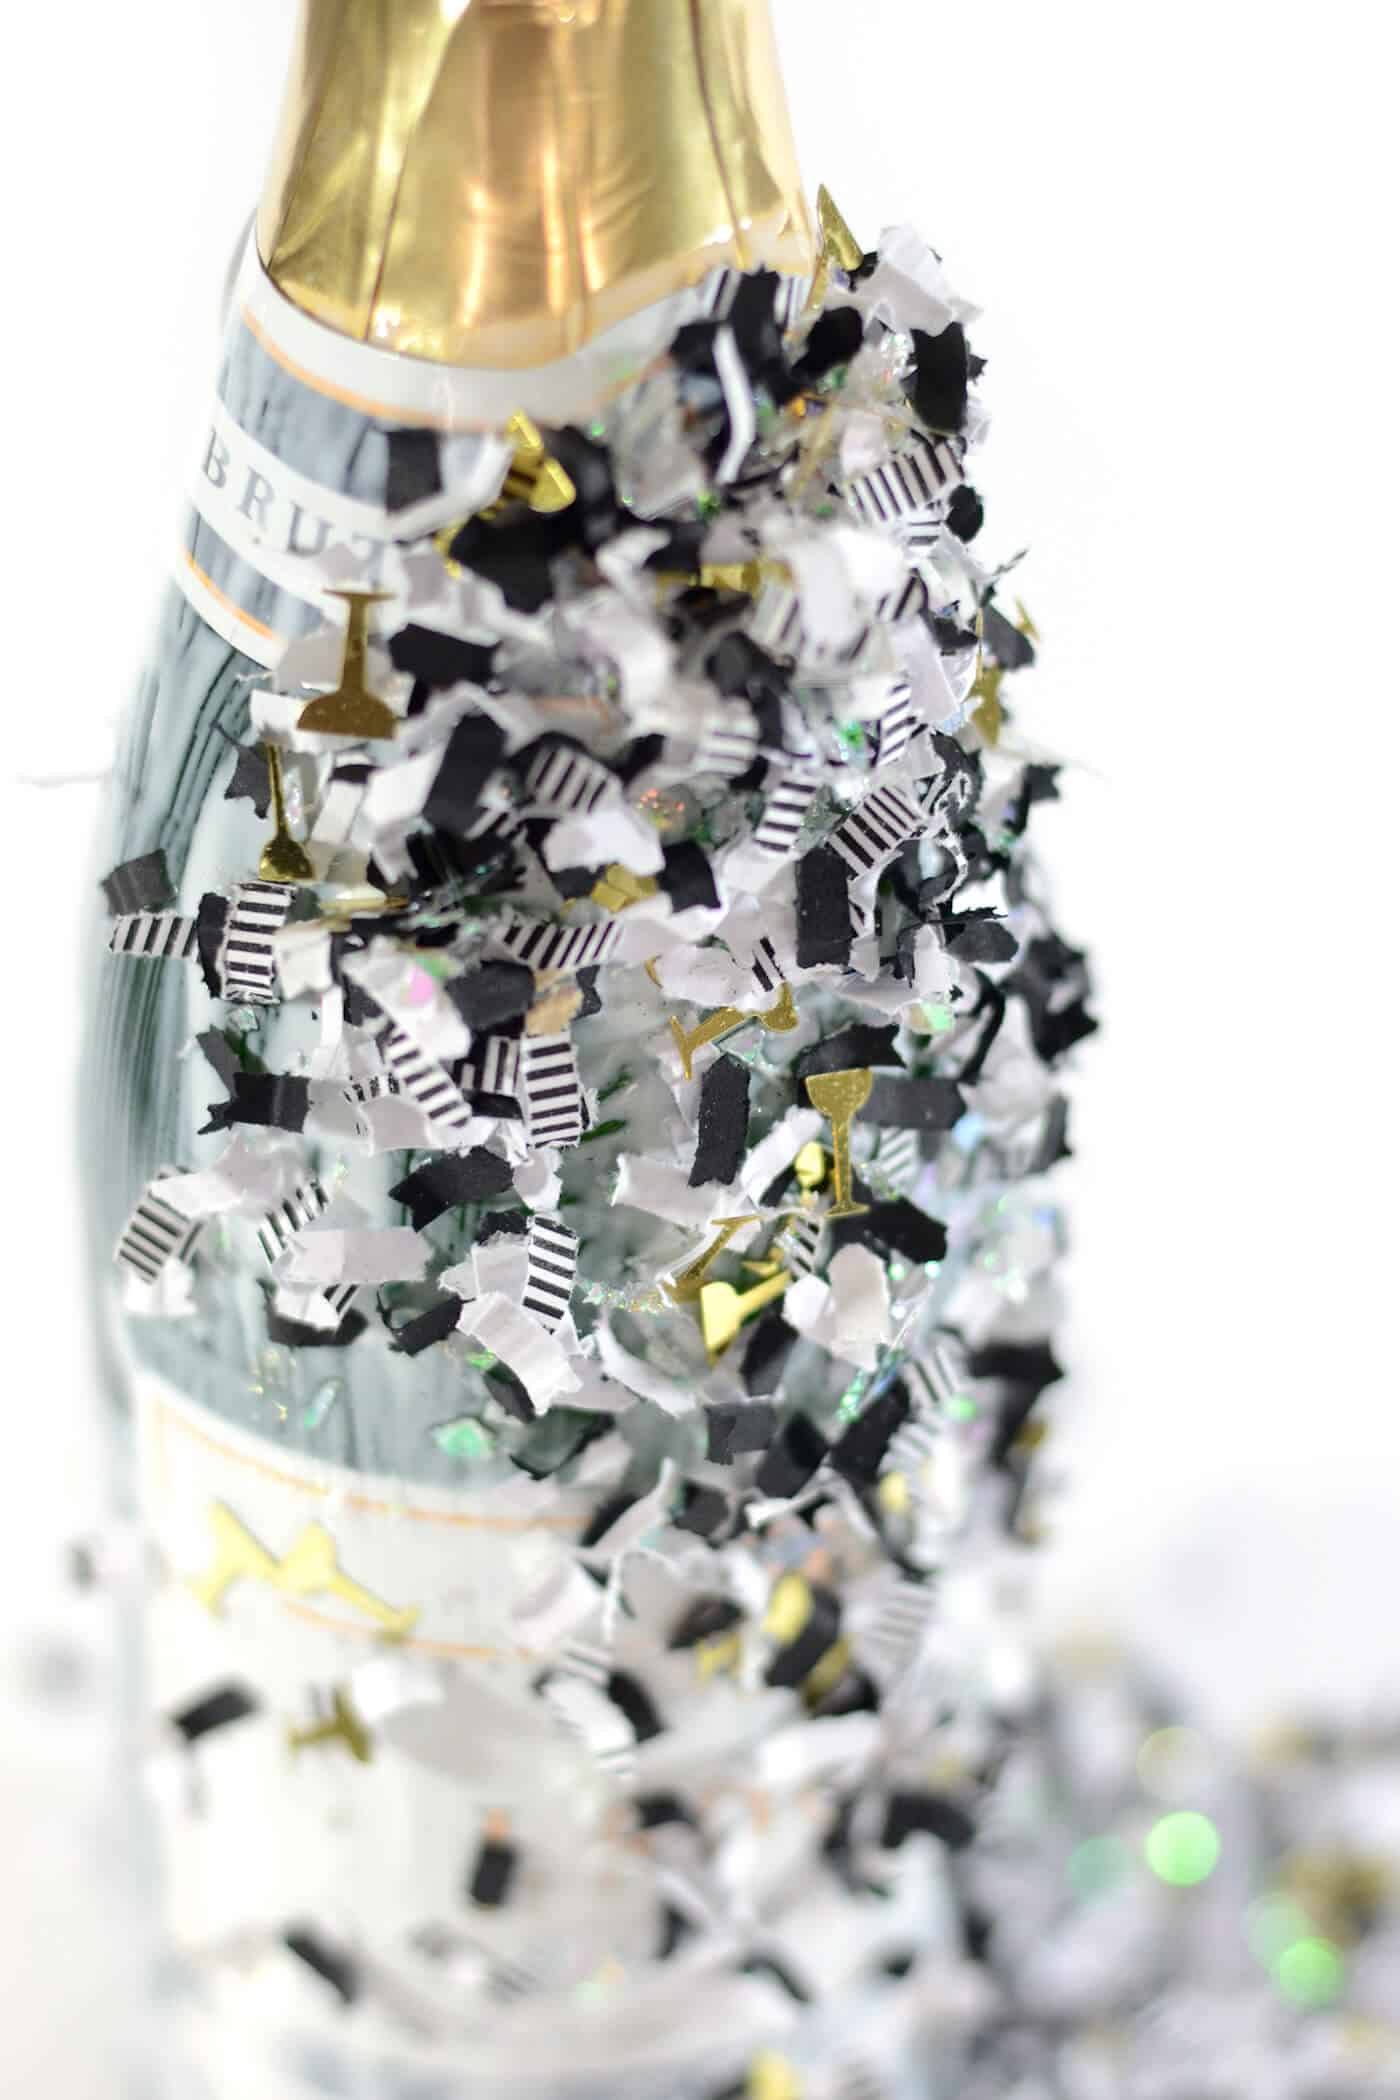 Close up of black, white and striped confetti for New Year's Eve